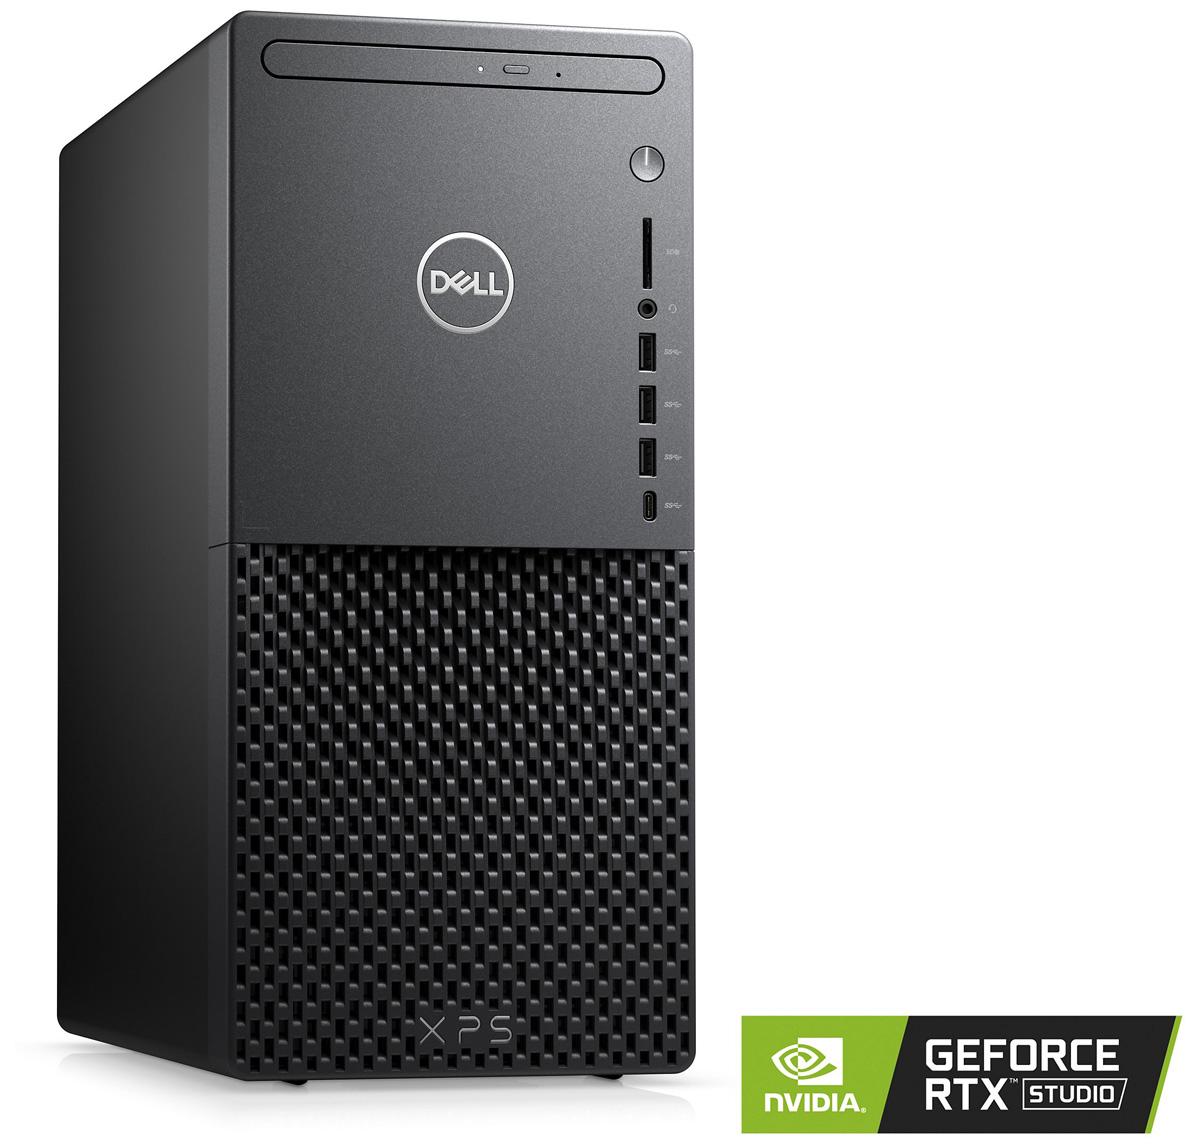 Dell XPS i7 32GB RTX3060 Desktop Computer Tower for $1309.98 Shipped